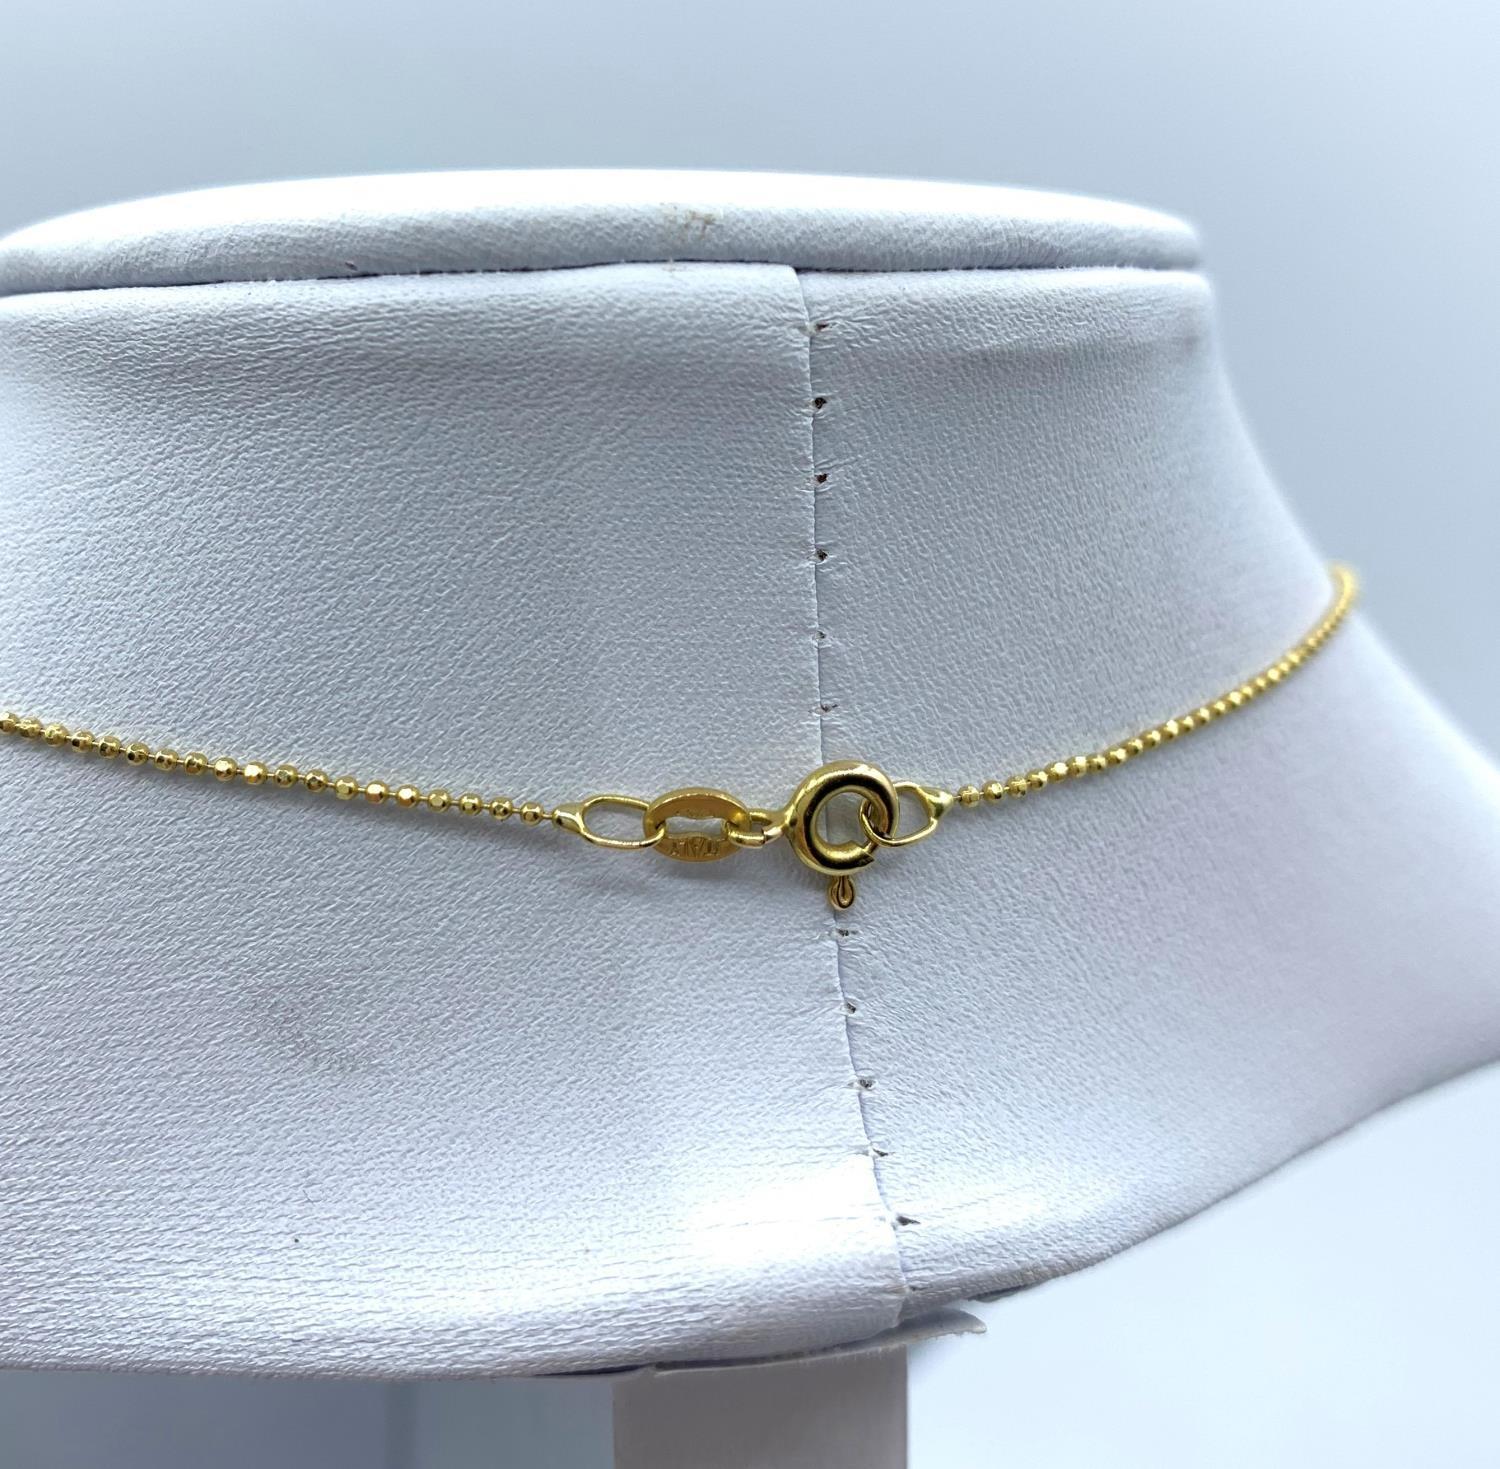 Diamond Drop Pendant in 18K Gold on a 9K Gold Chain, weight 3.1g and 36cm long chain - Image 4 of 4